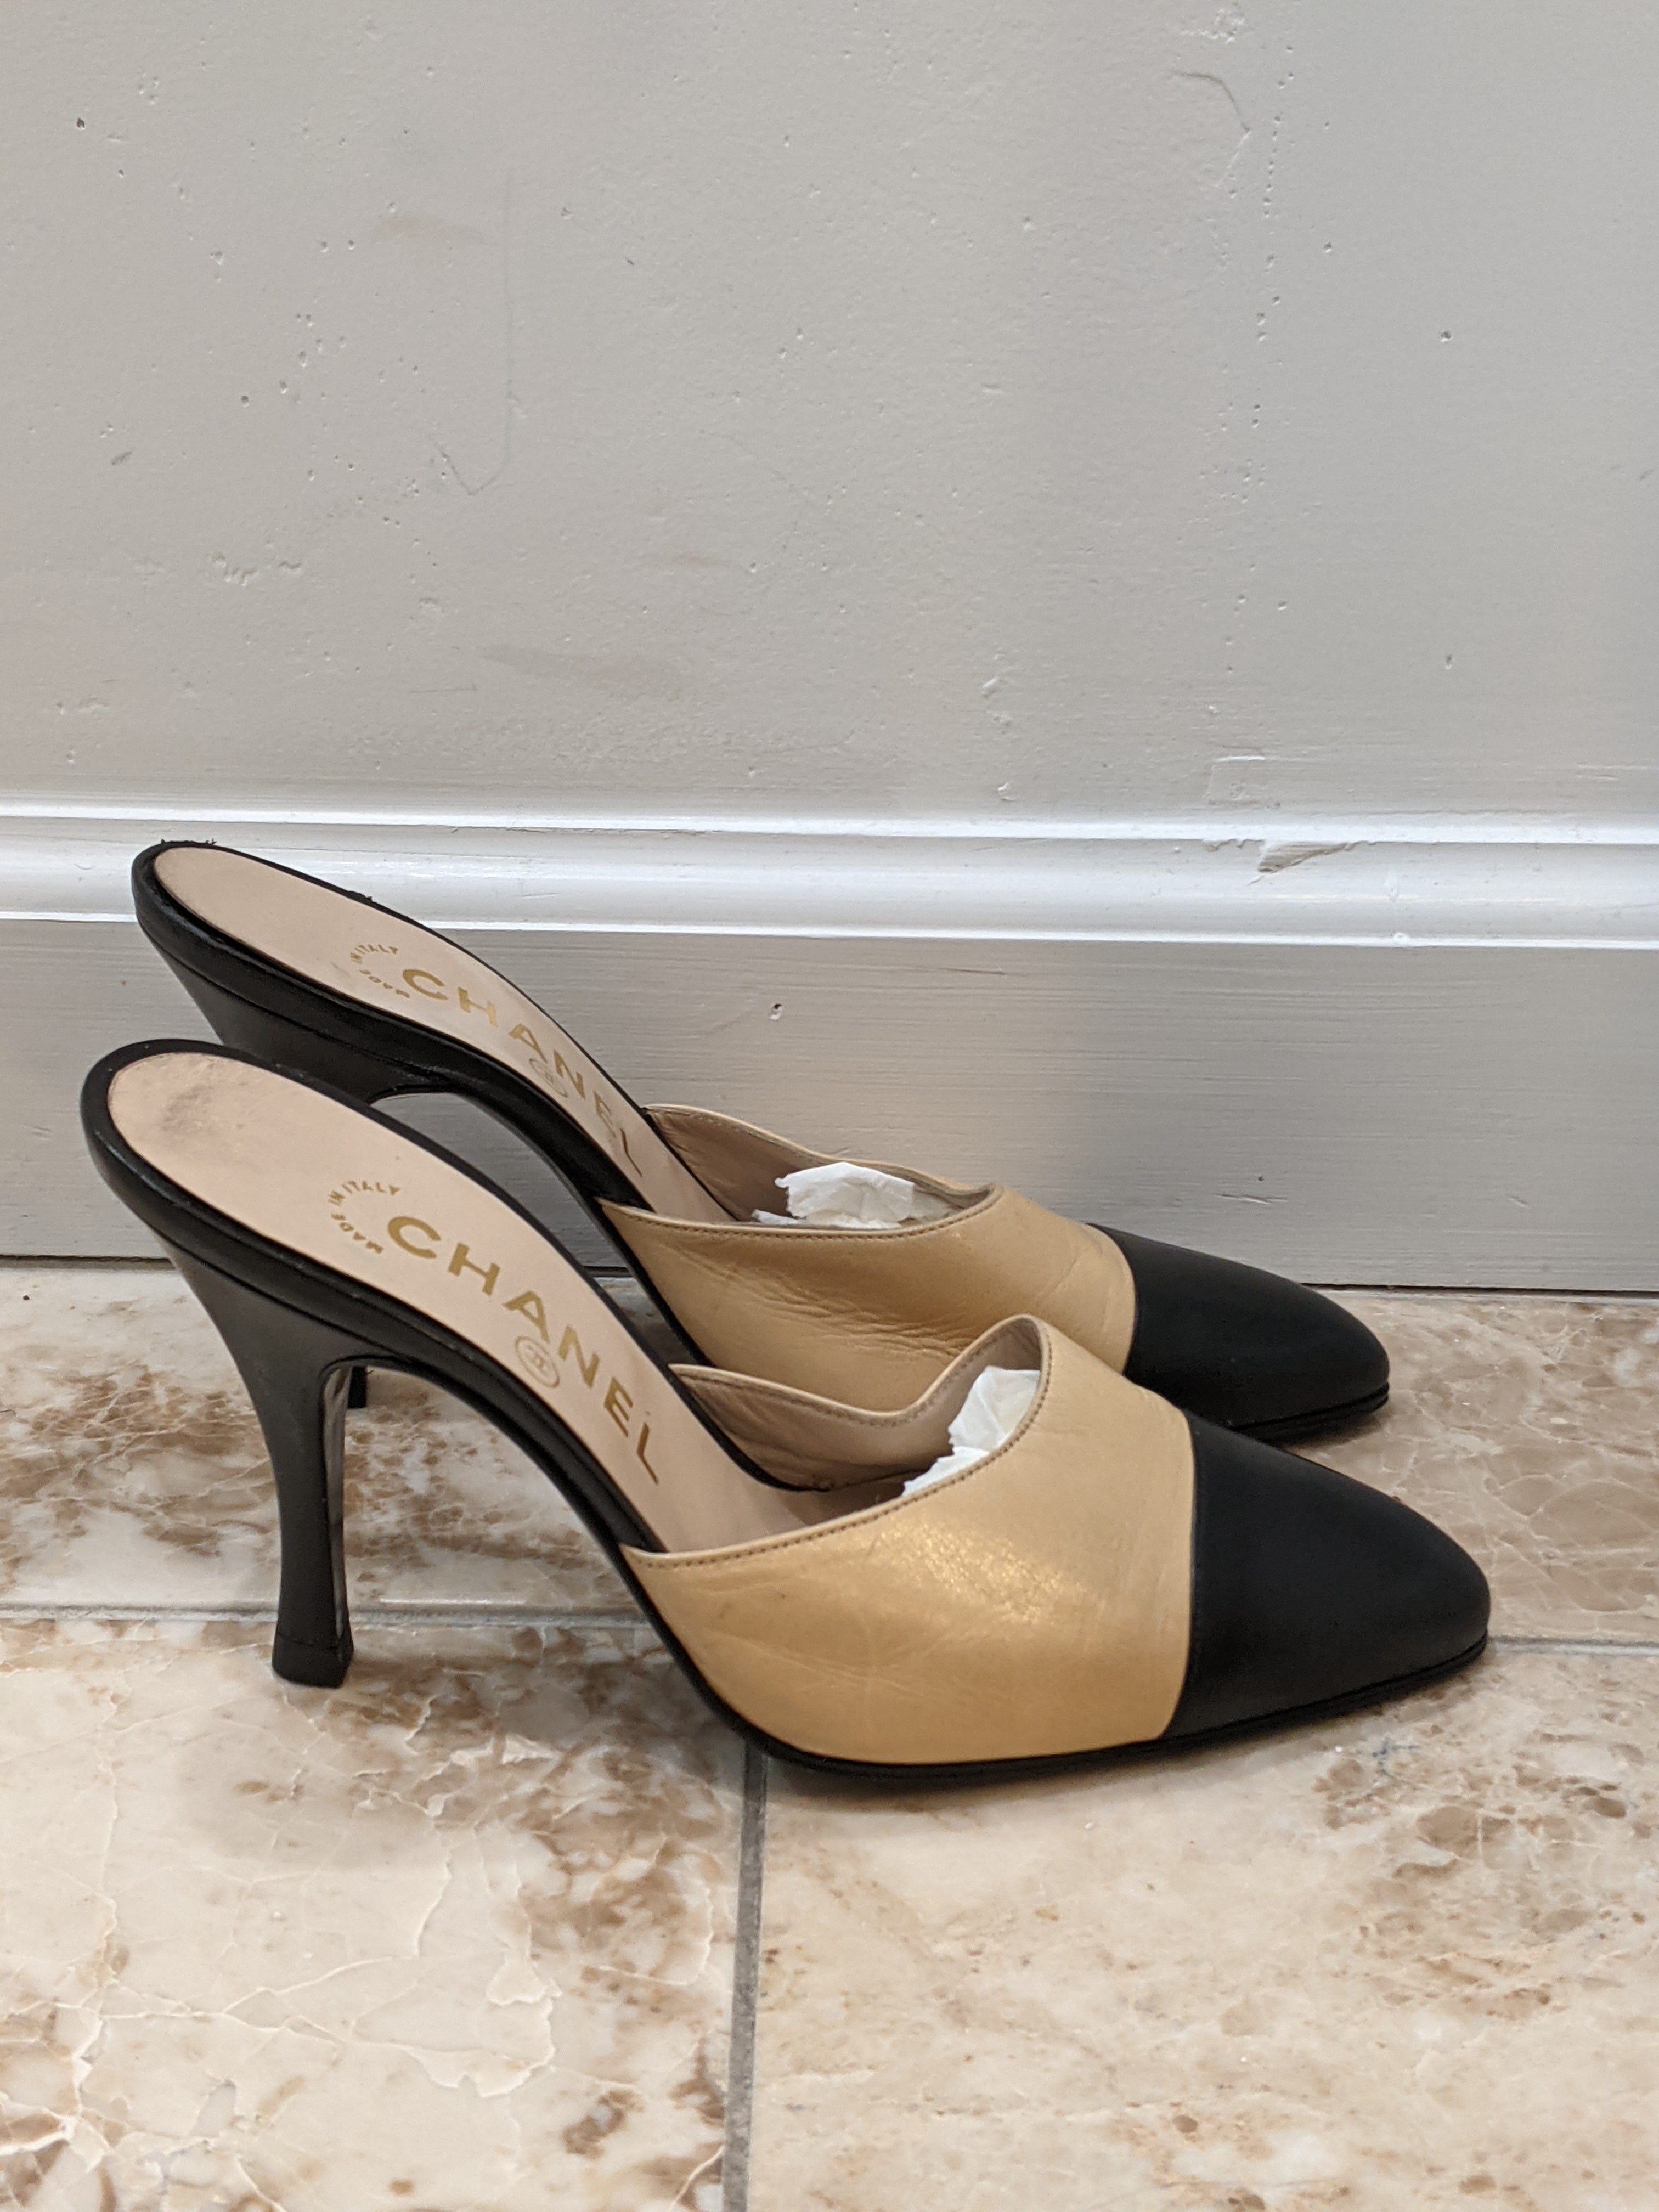 Vintage Beige And Black Leather Mules By Chanel